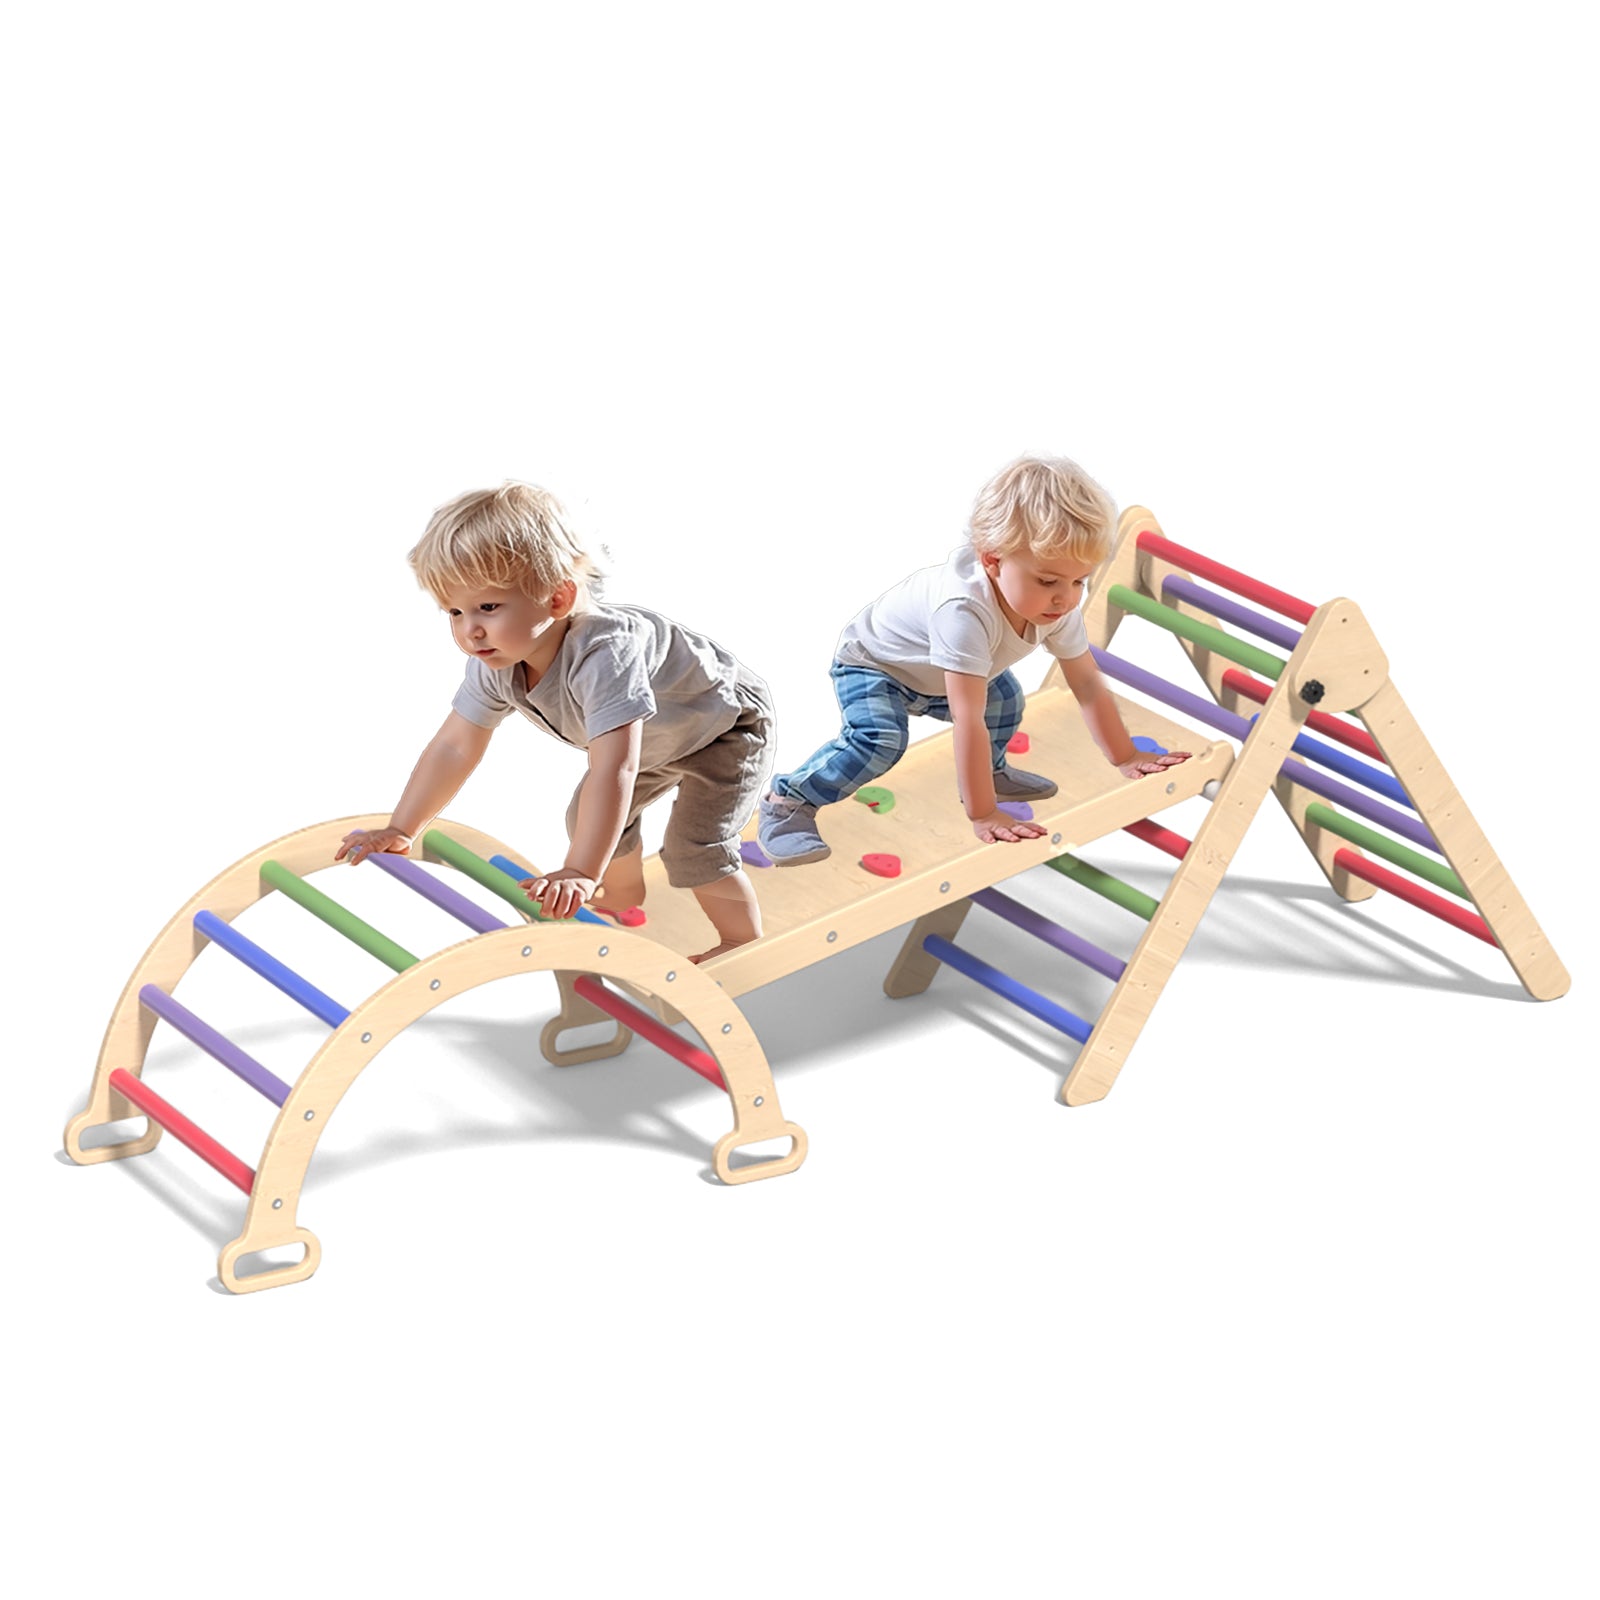 XJD 7 in 1 Wood Climber Play Set Colorful In Stock USA